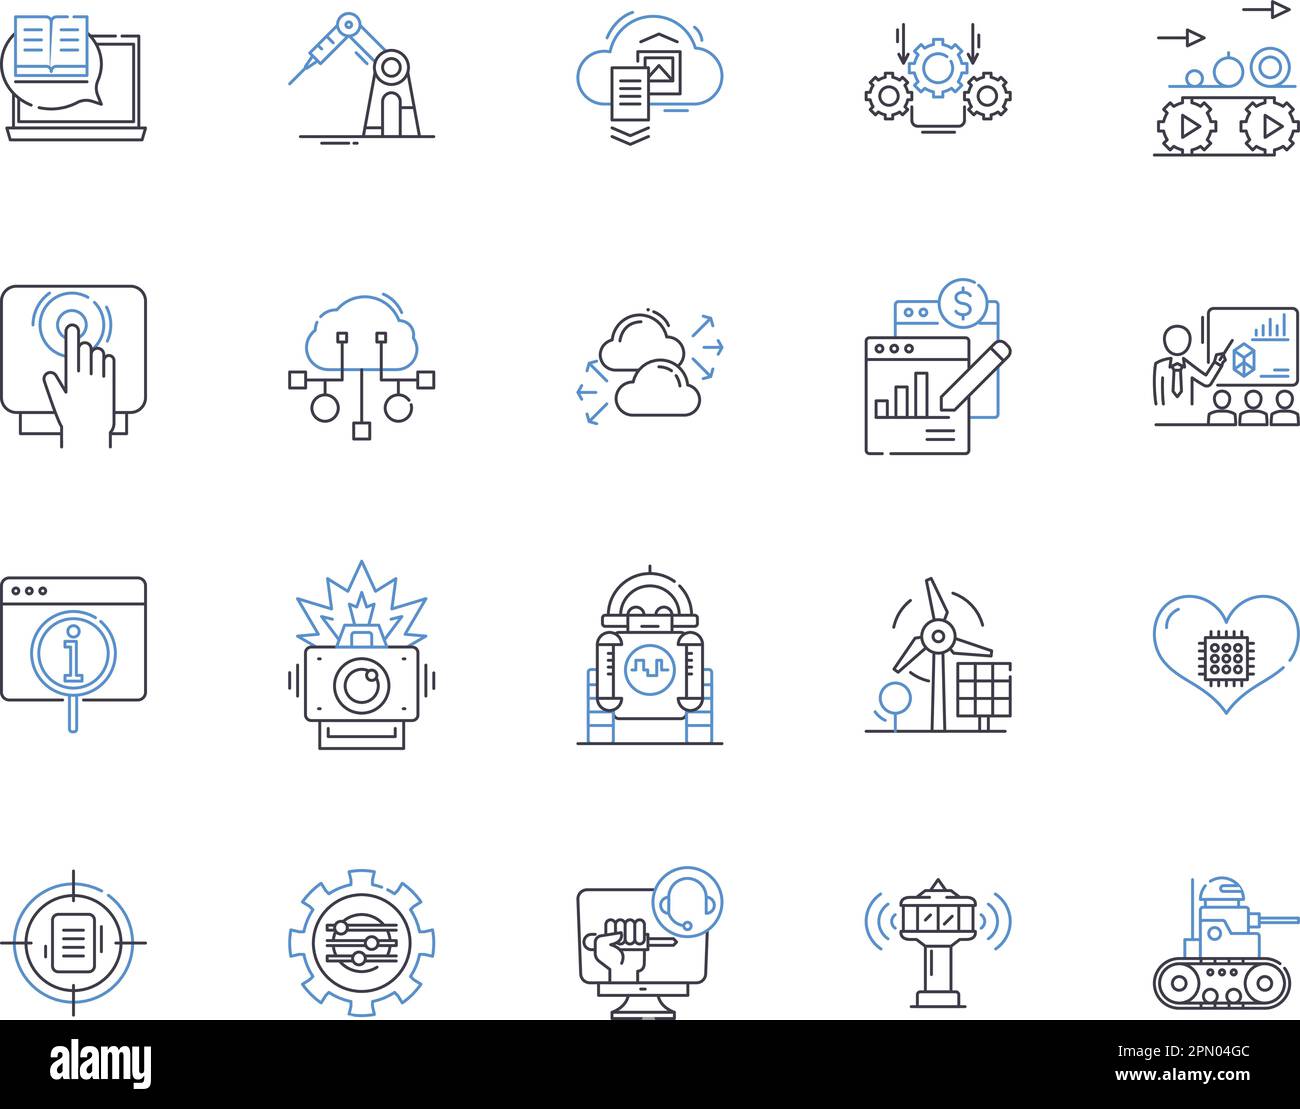 Robotic process automation outline icons collection. Robotics, Process, Automation, RPA, Machine, Learning, AI vector and illustration concept set Stock Vector